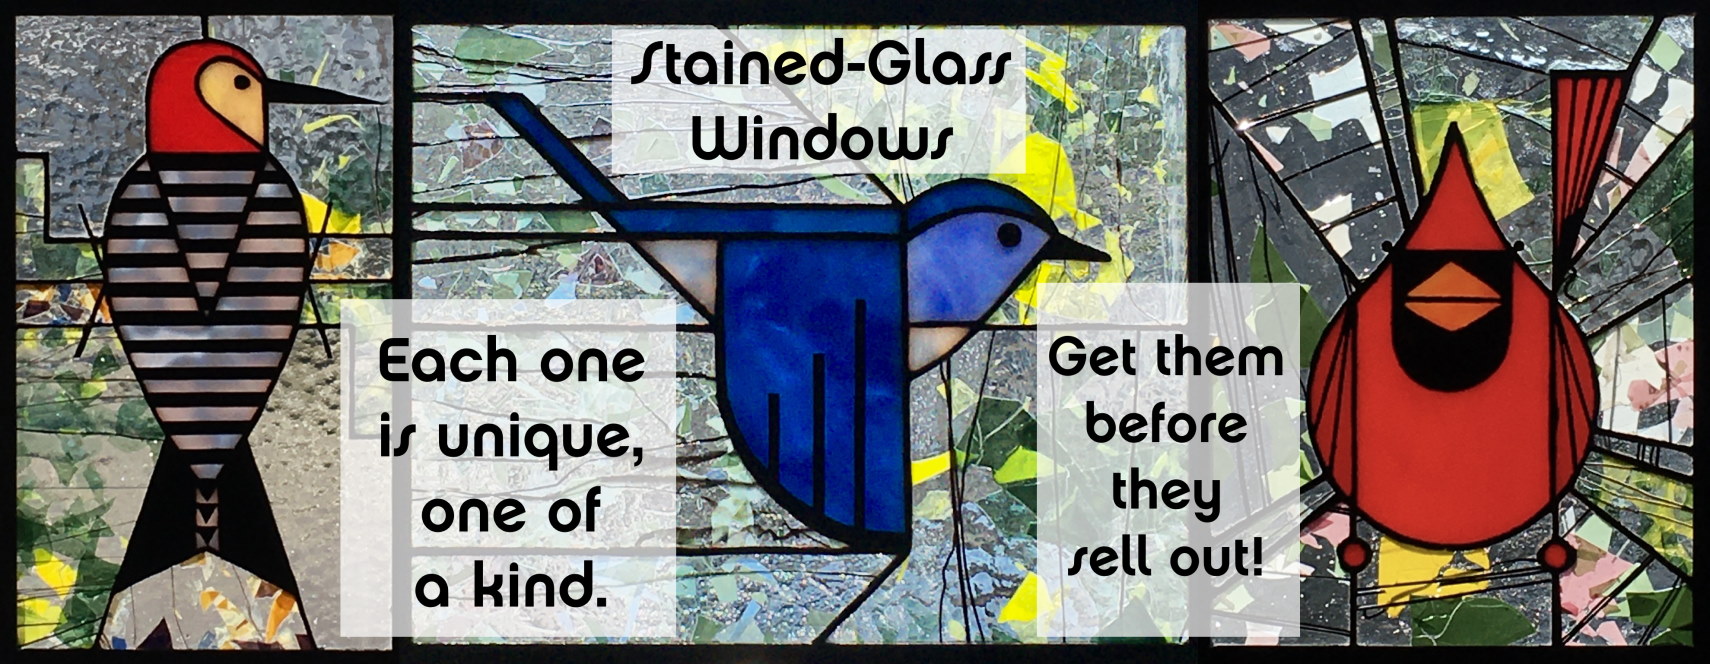 Stained-Glass Windows: Each one is unique, one-of-a-kind; get them before they sell out!